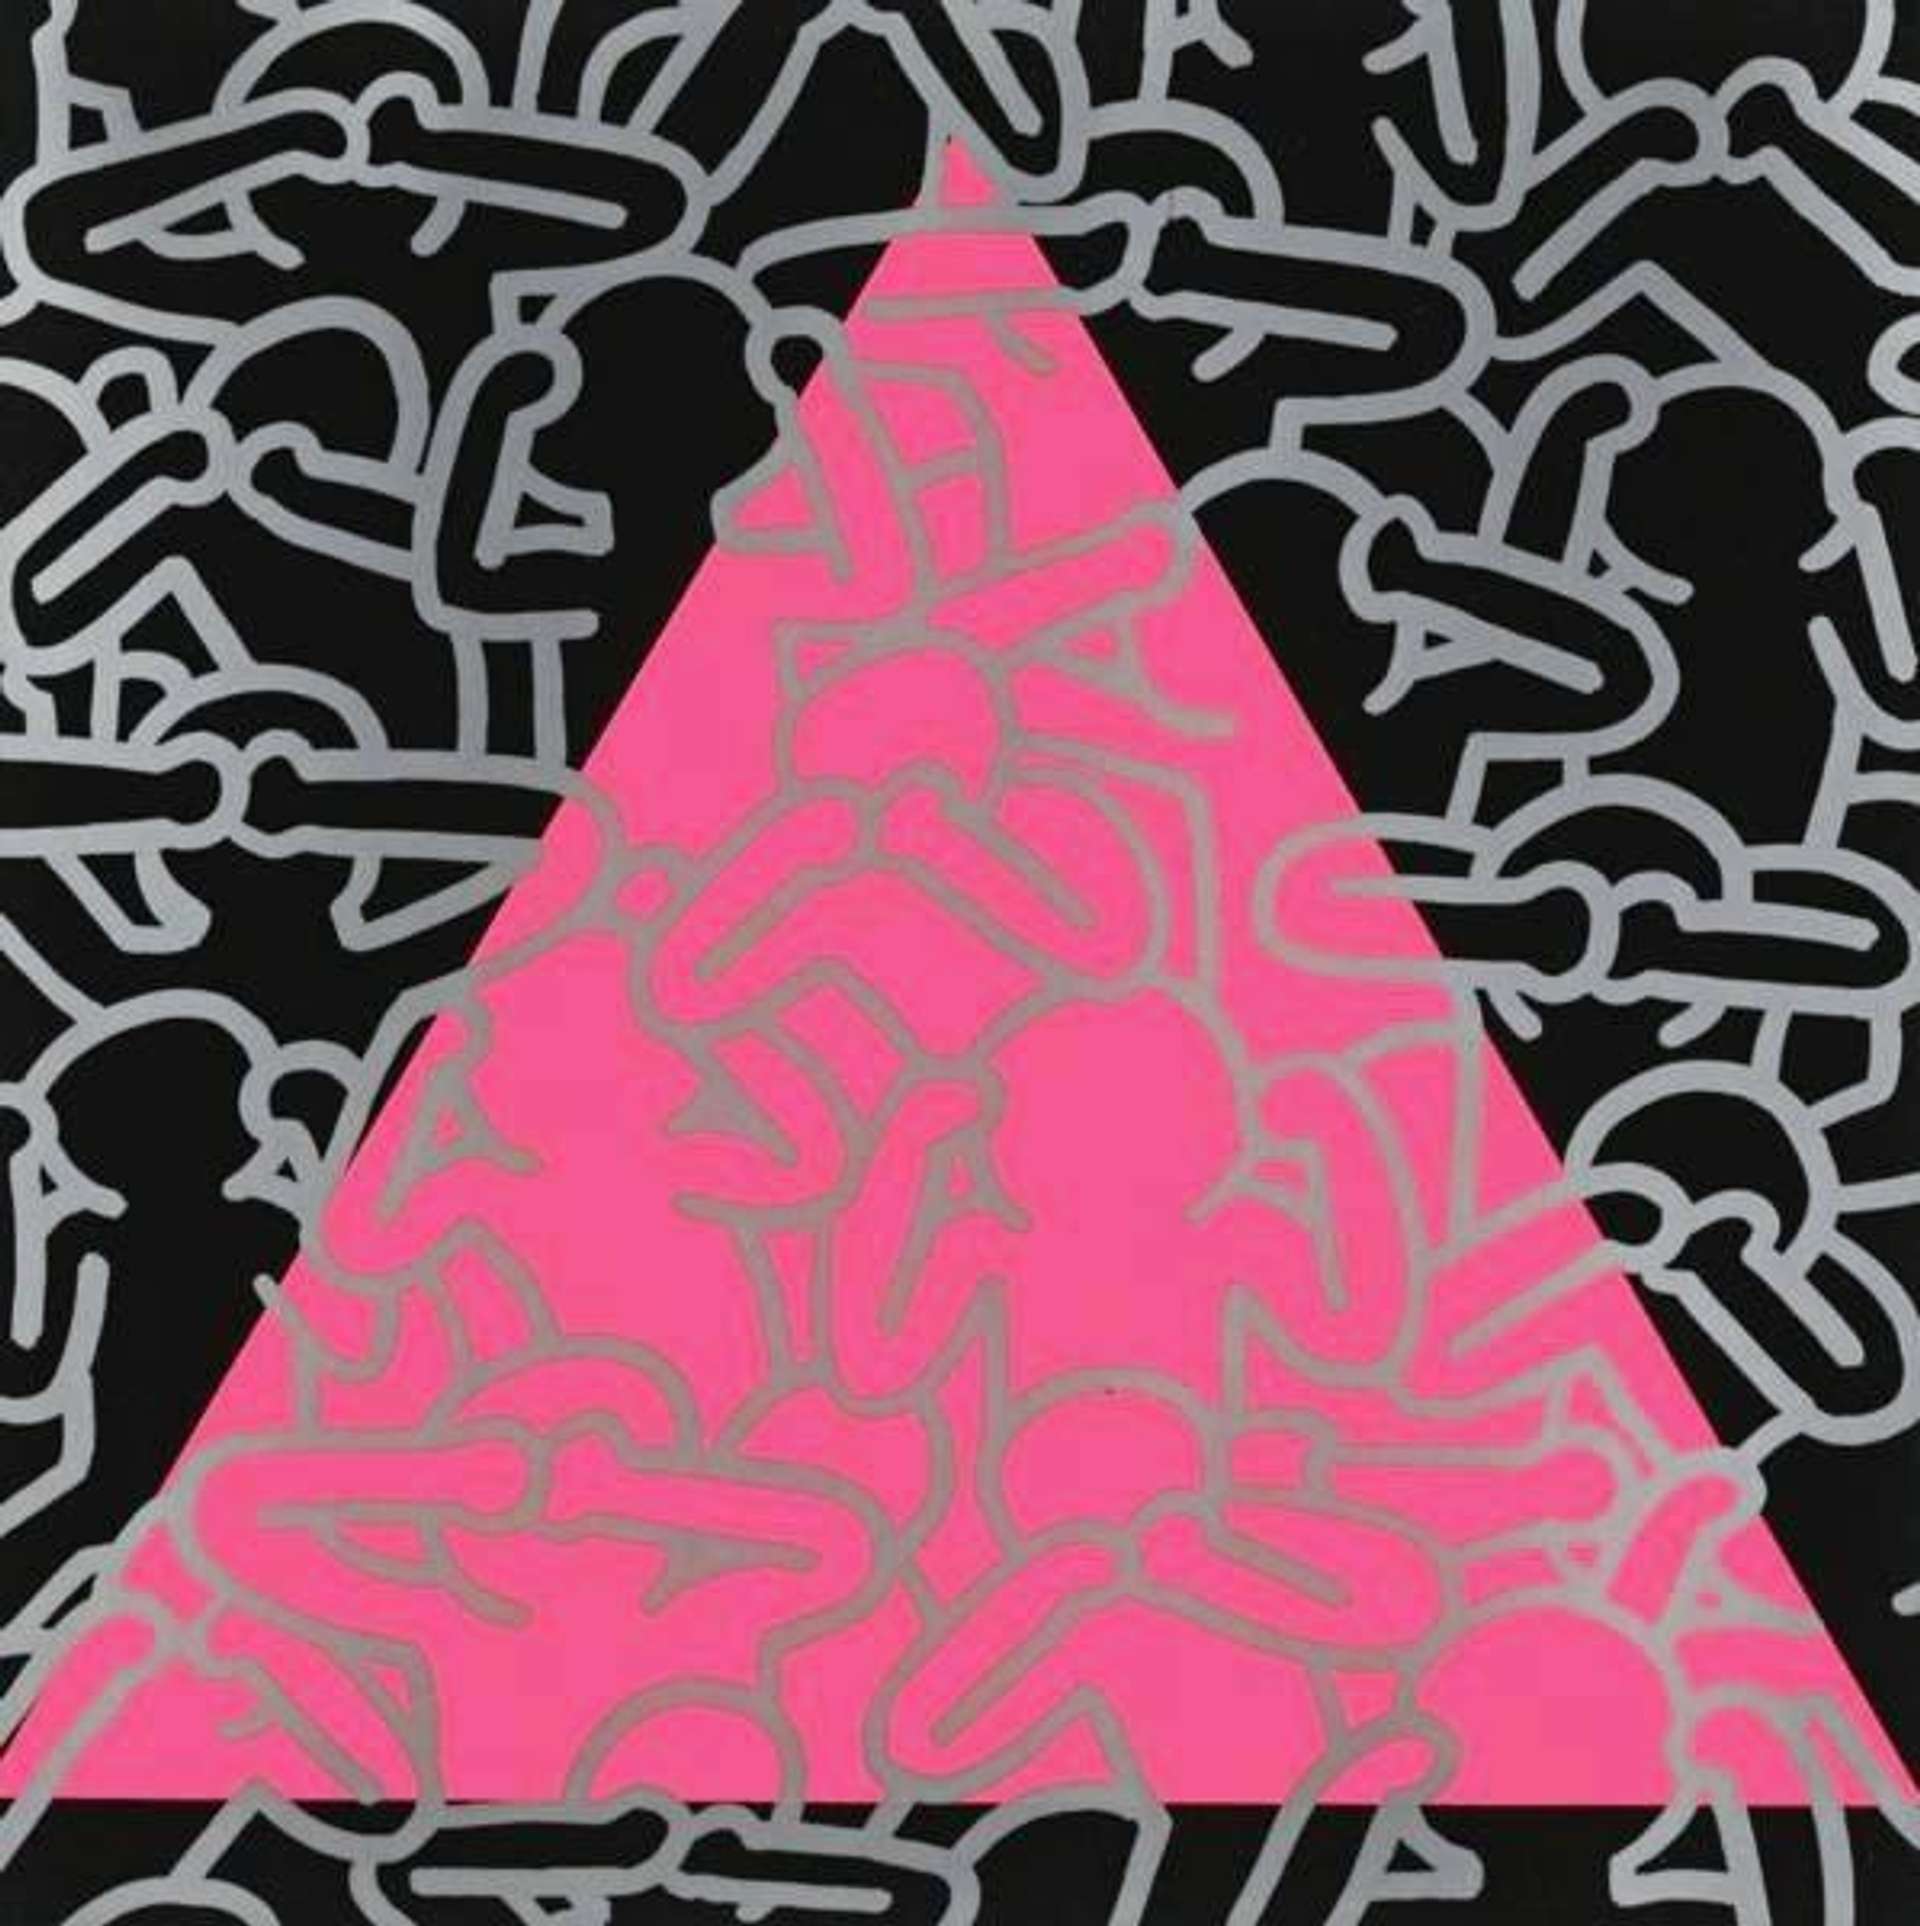 Silence Equals Death by Keith Haring